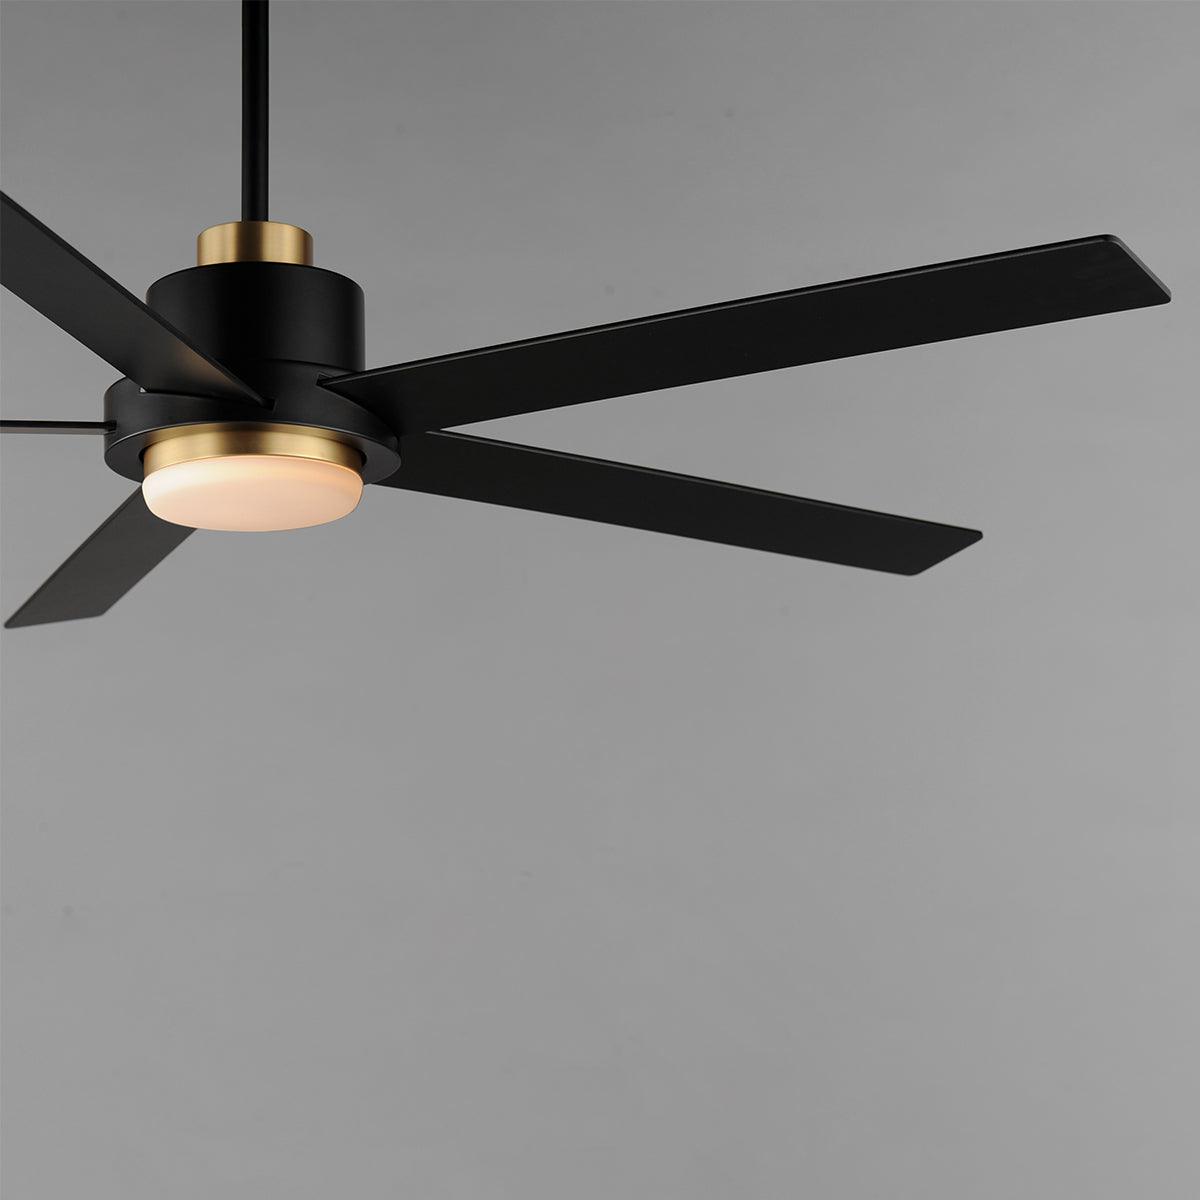 Daisy 60 Inch 5-Blade Ceiling Fan With Light and Wall Control - Bees Lighting